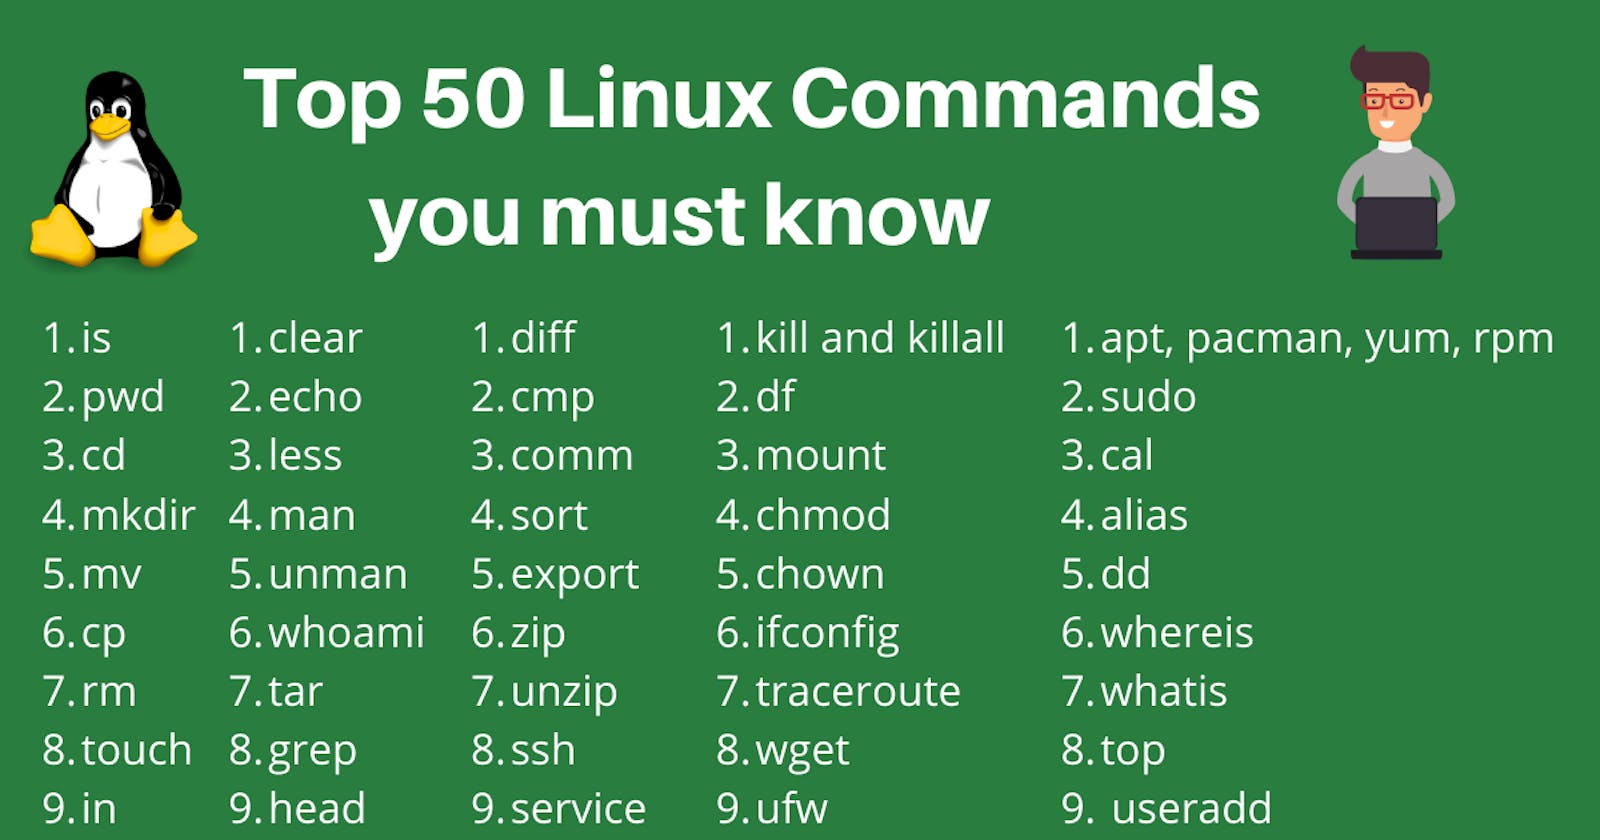 Day-2: Basic Linux Commands 🐧